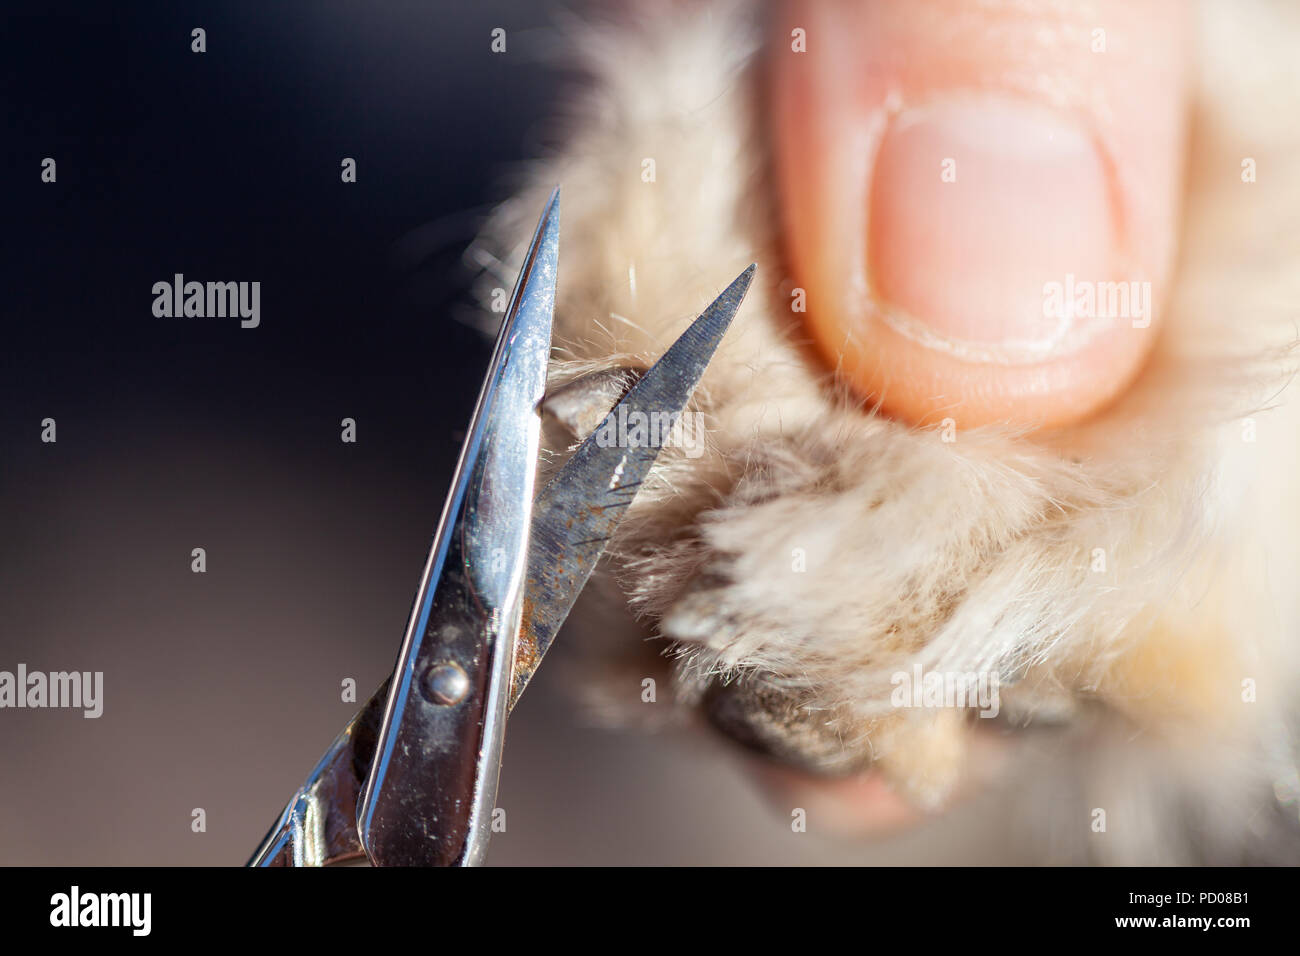 Nail care with a scissor on a dog paw Stock Photo